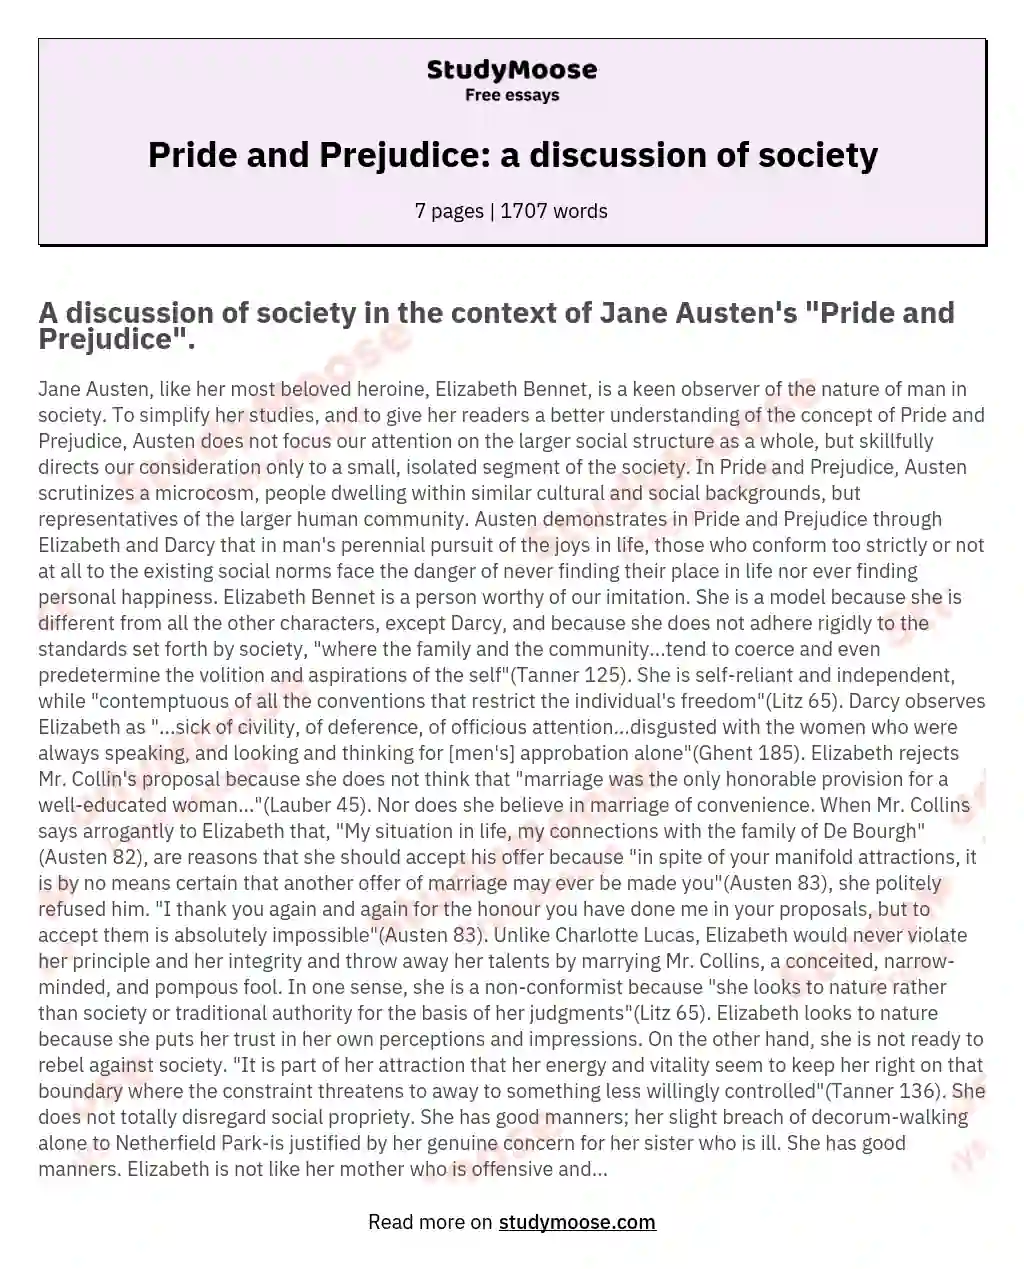 essay questions on pride and prejudice